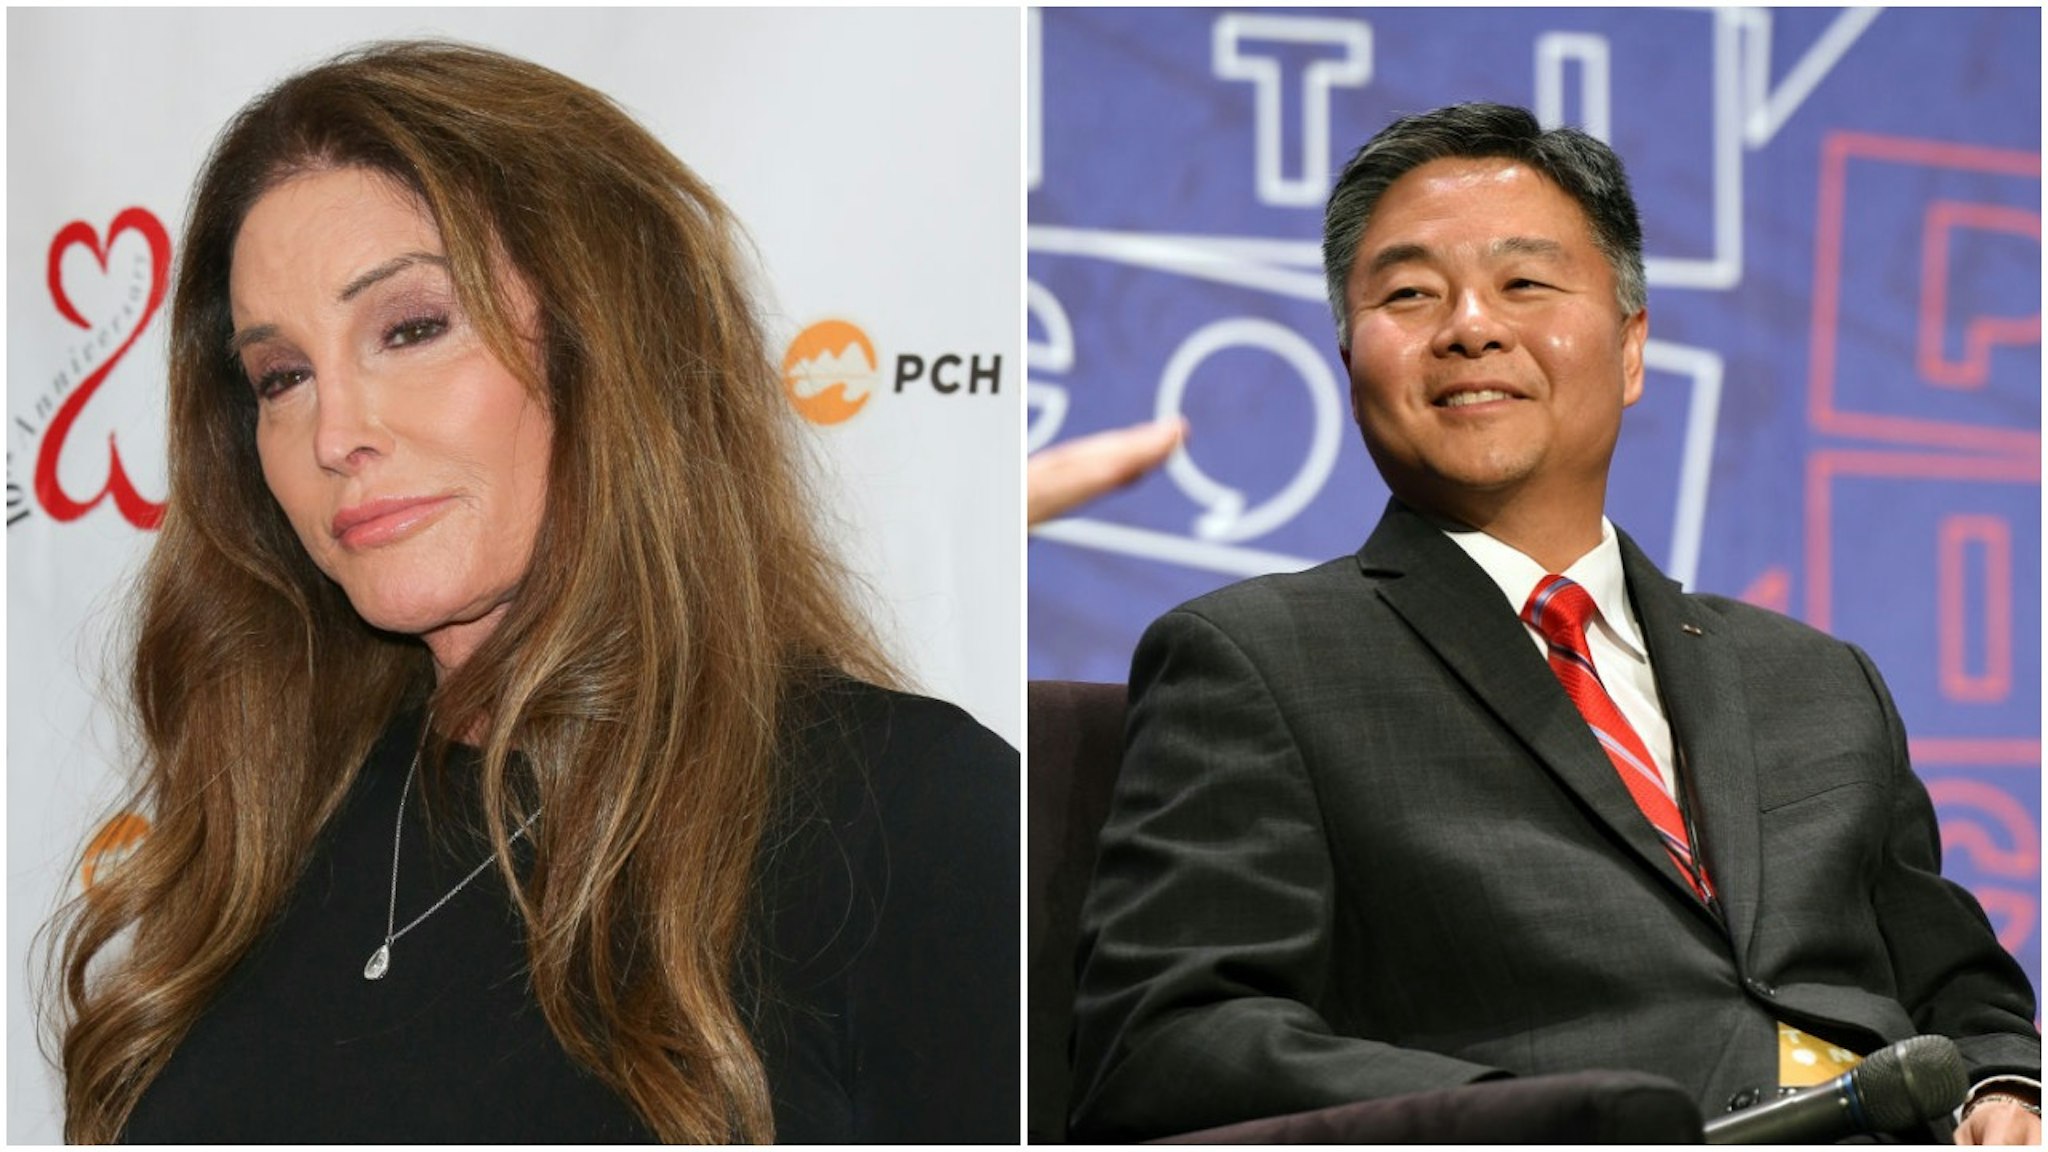 Caitlyn Jenner and Rep. Ted Lieu